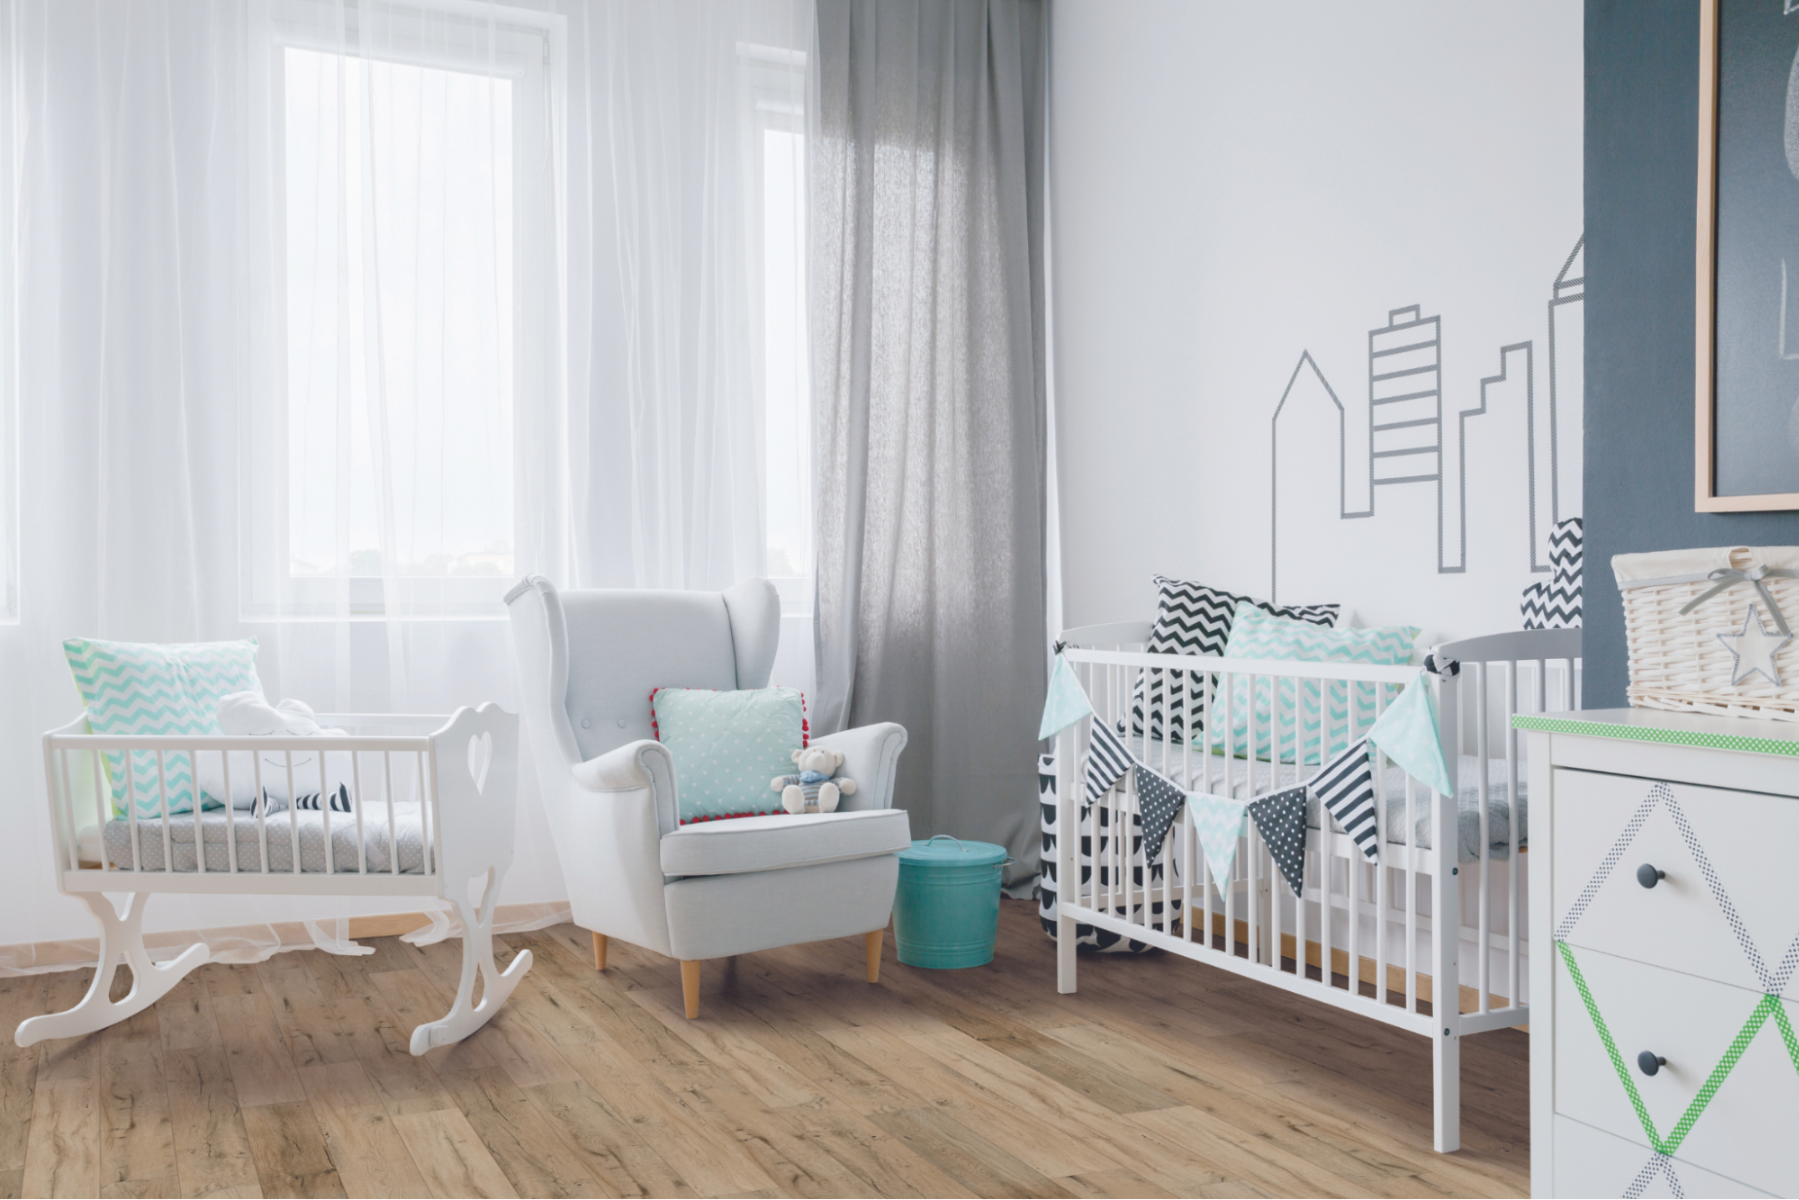 Modern bedroom for a baby featuring white furniture, including two cribs